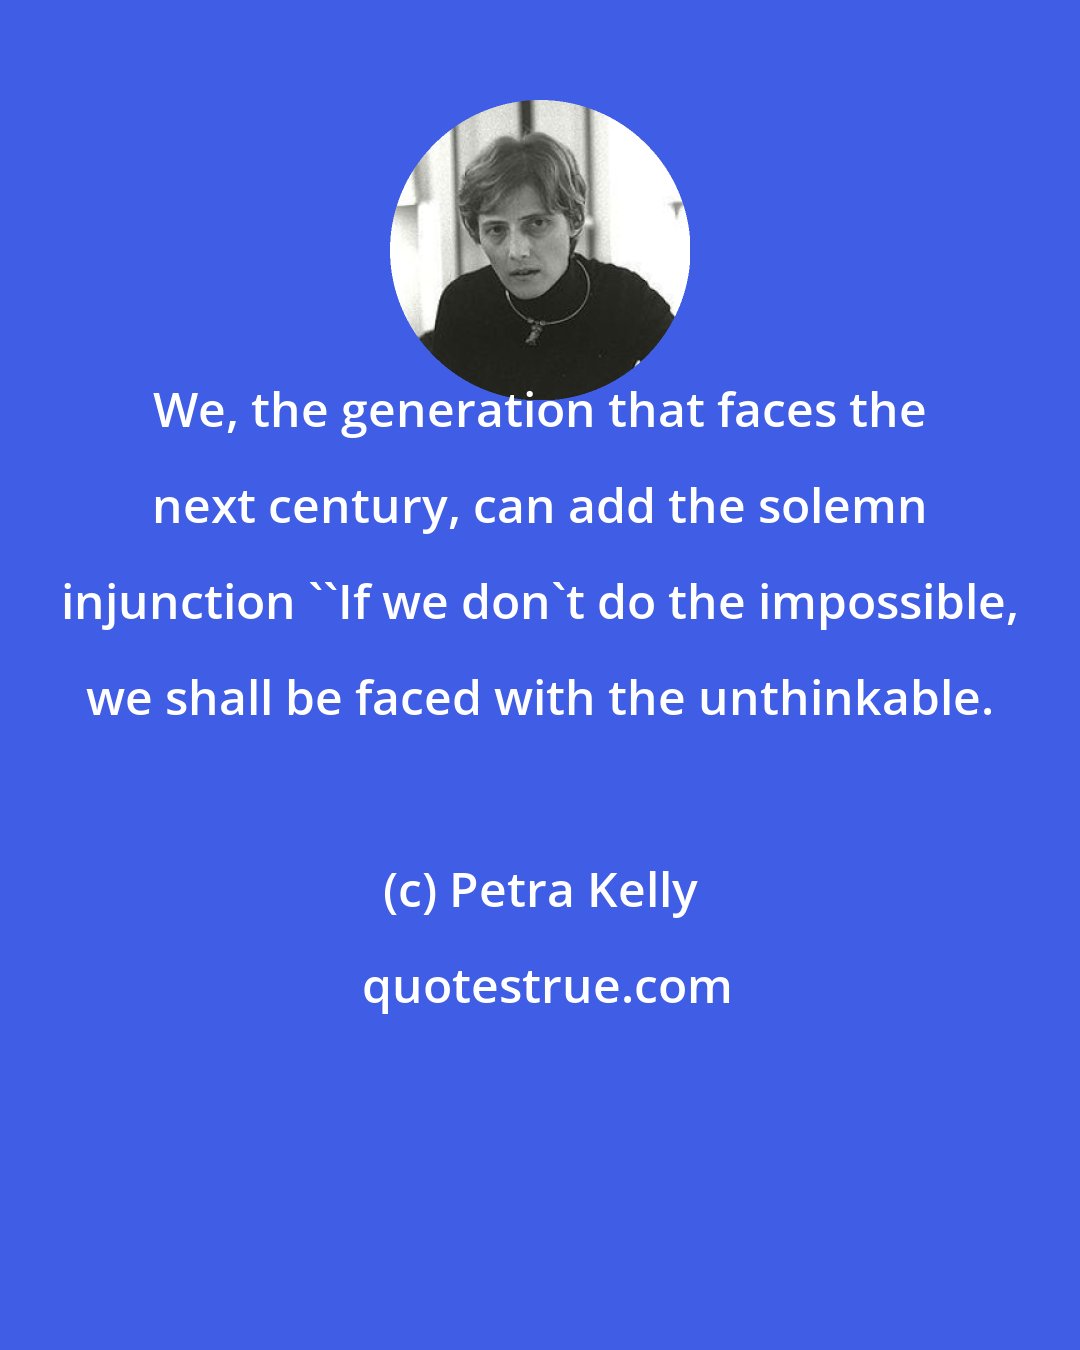 Petra Kelly: We, the generation that faces the next century, can add the solemn injunction ''If we don't do the impossible, we shall be faced with the unthinkable.